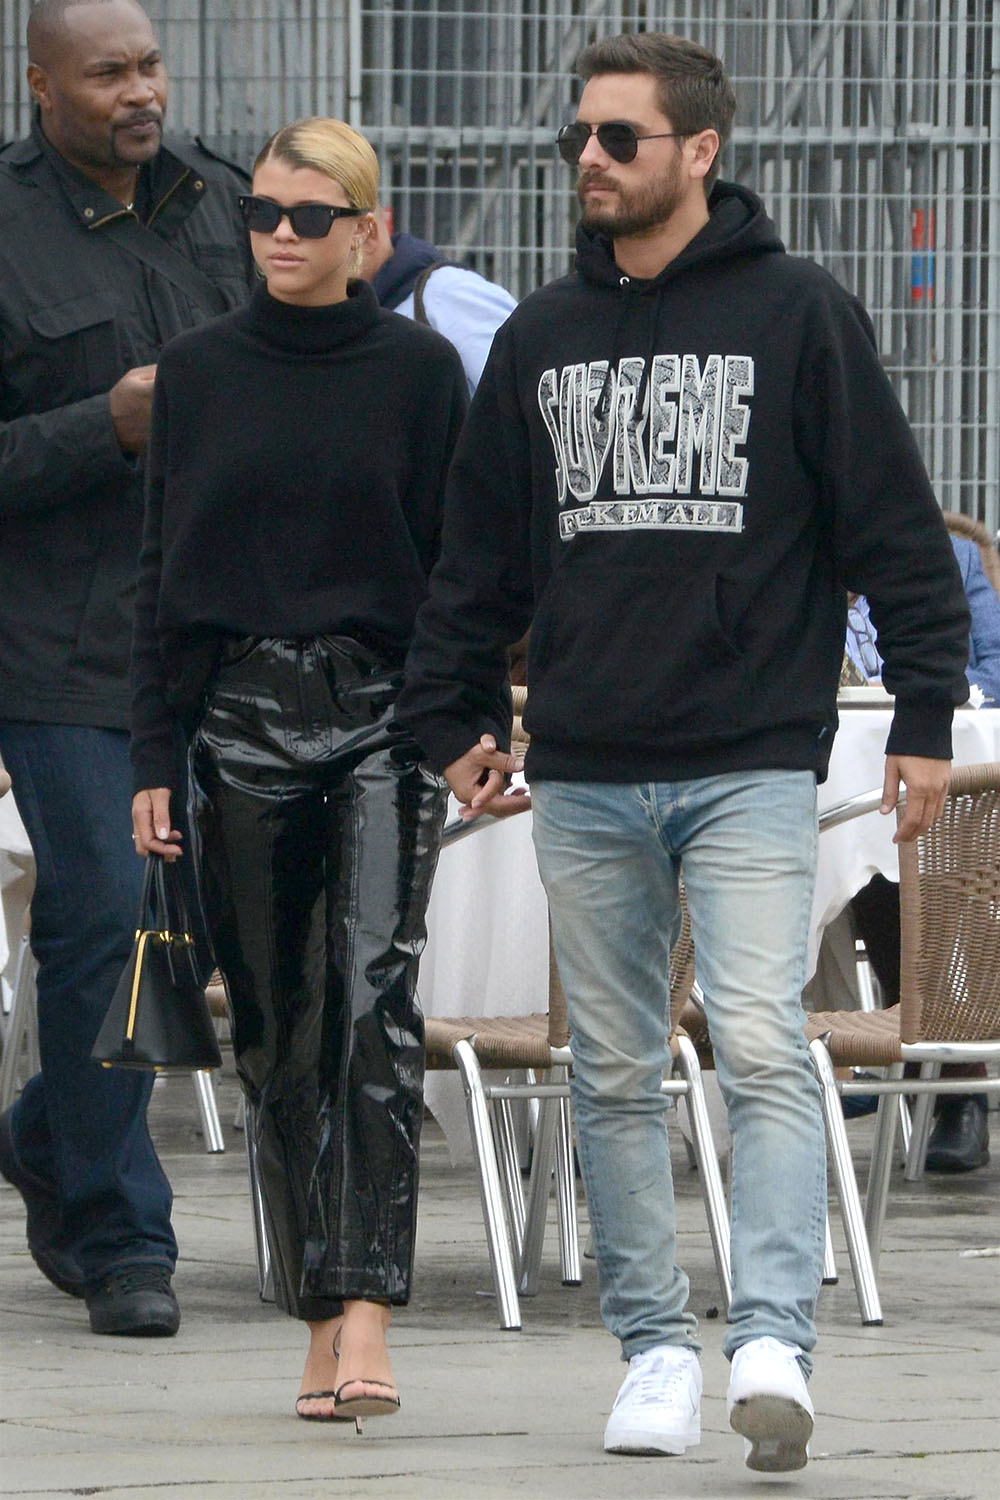 Sofia Richie and her boyfriend Scott Disick hold hands in Italy